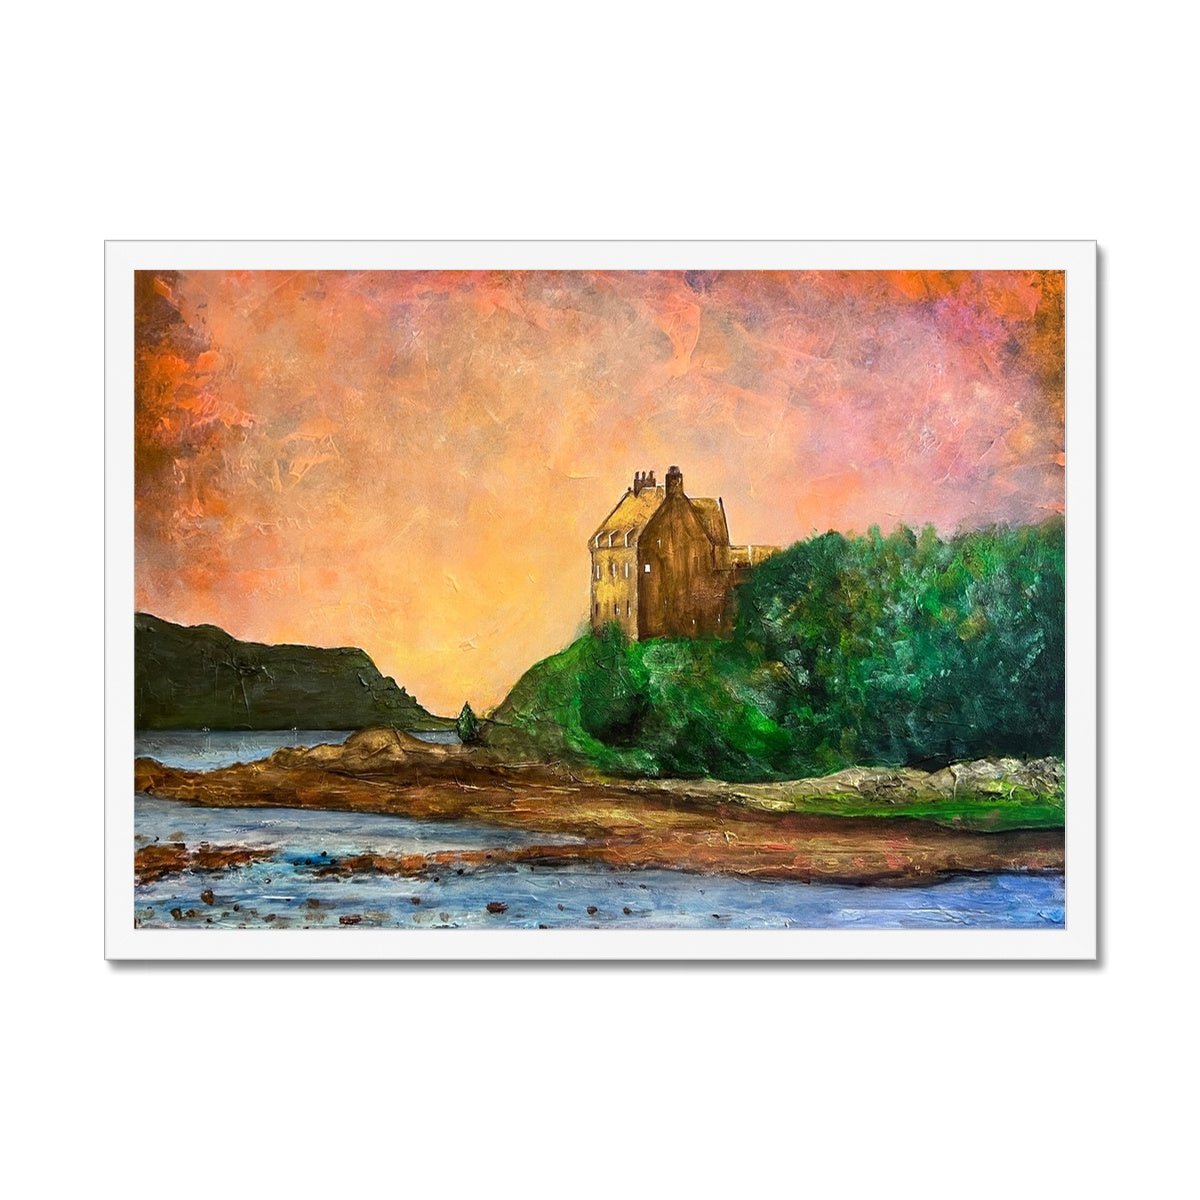 Duntrune Castle Painting | Framed Prints From Scotland-Framed Prints-Historic & Iconic Scotland Art Gallery-A2 Landscape-White Frame-Paintings, Prints, Homeware, Art Gifts From Scotland By Scottish Artist Kevin Hunter